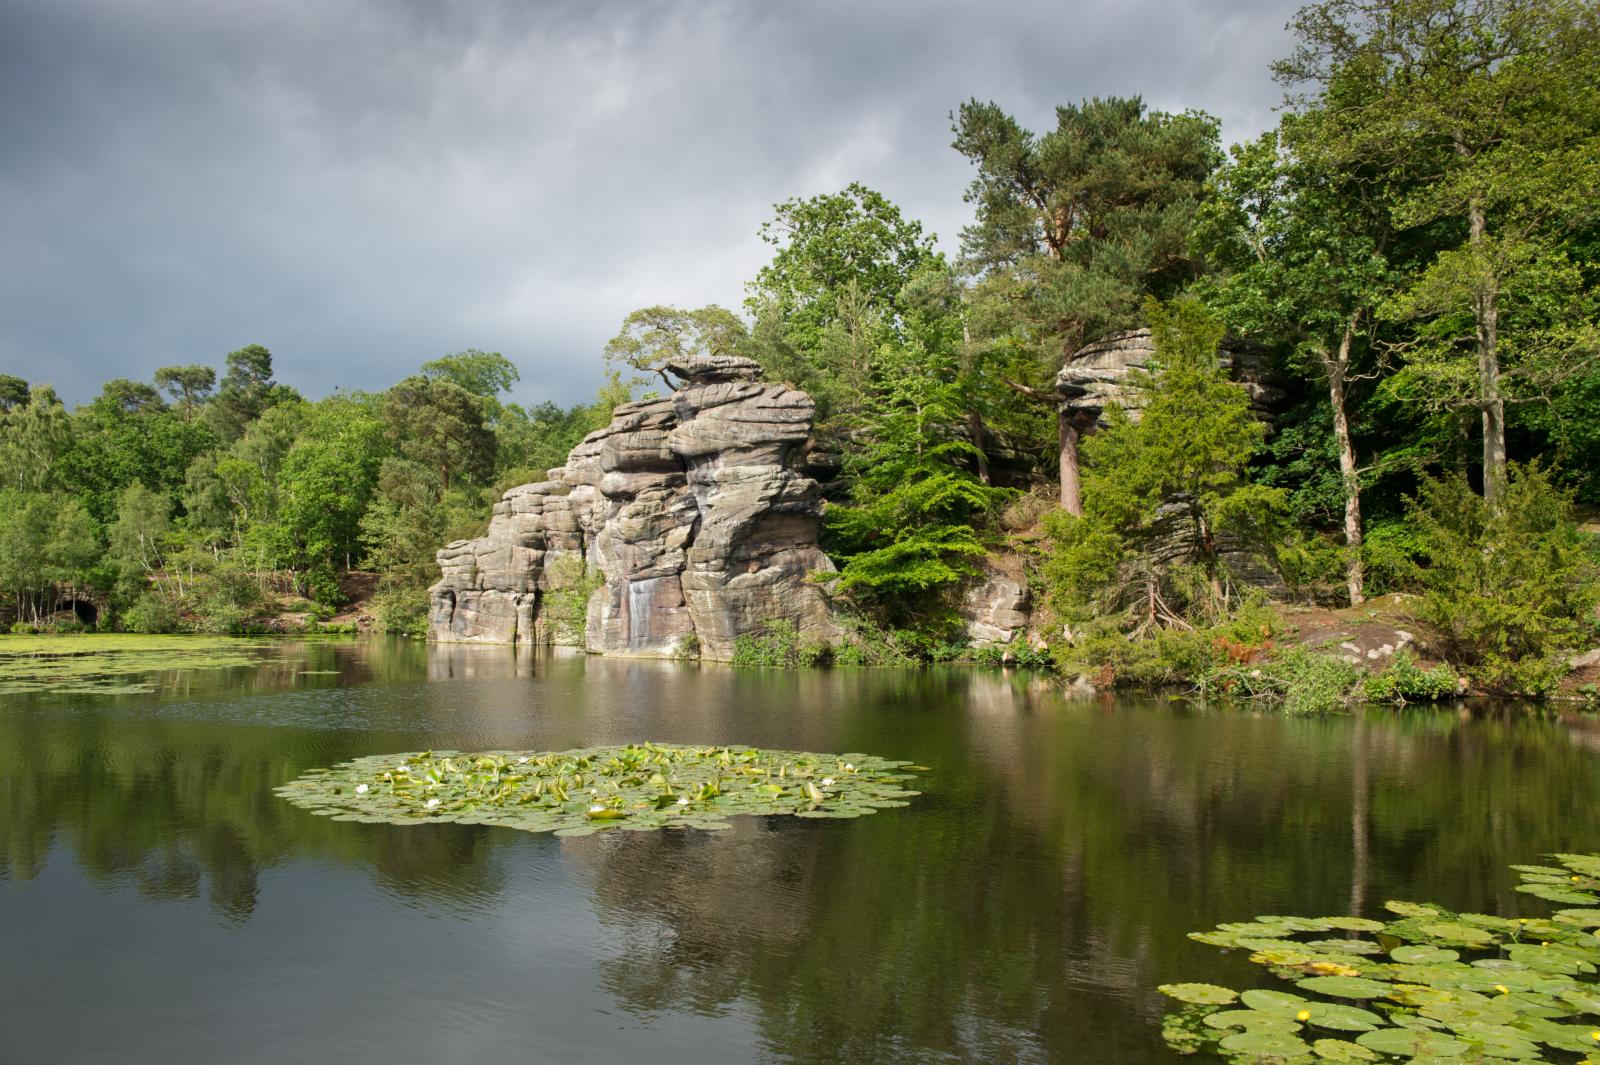 Lake with water lillies in the foreground bordered by dramatic rock features and trees.